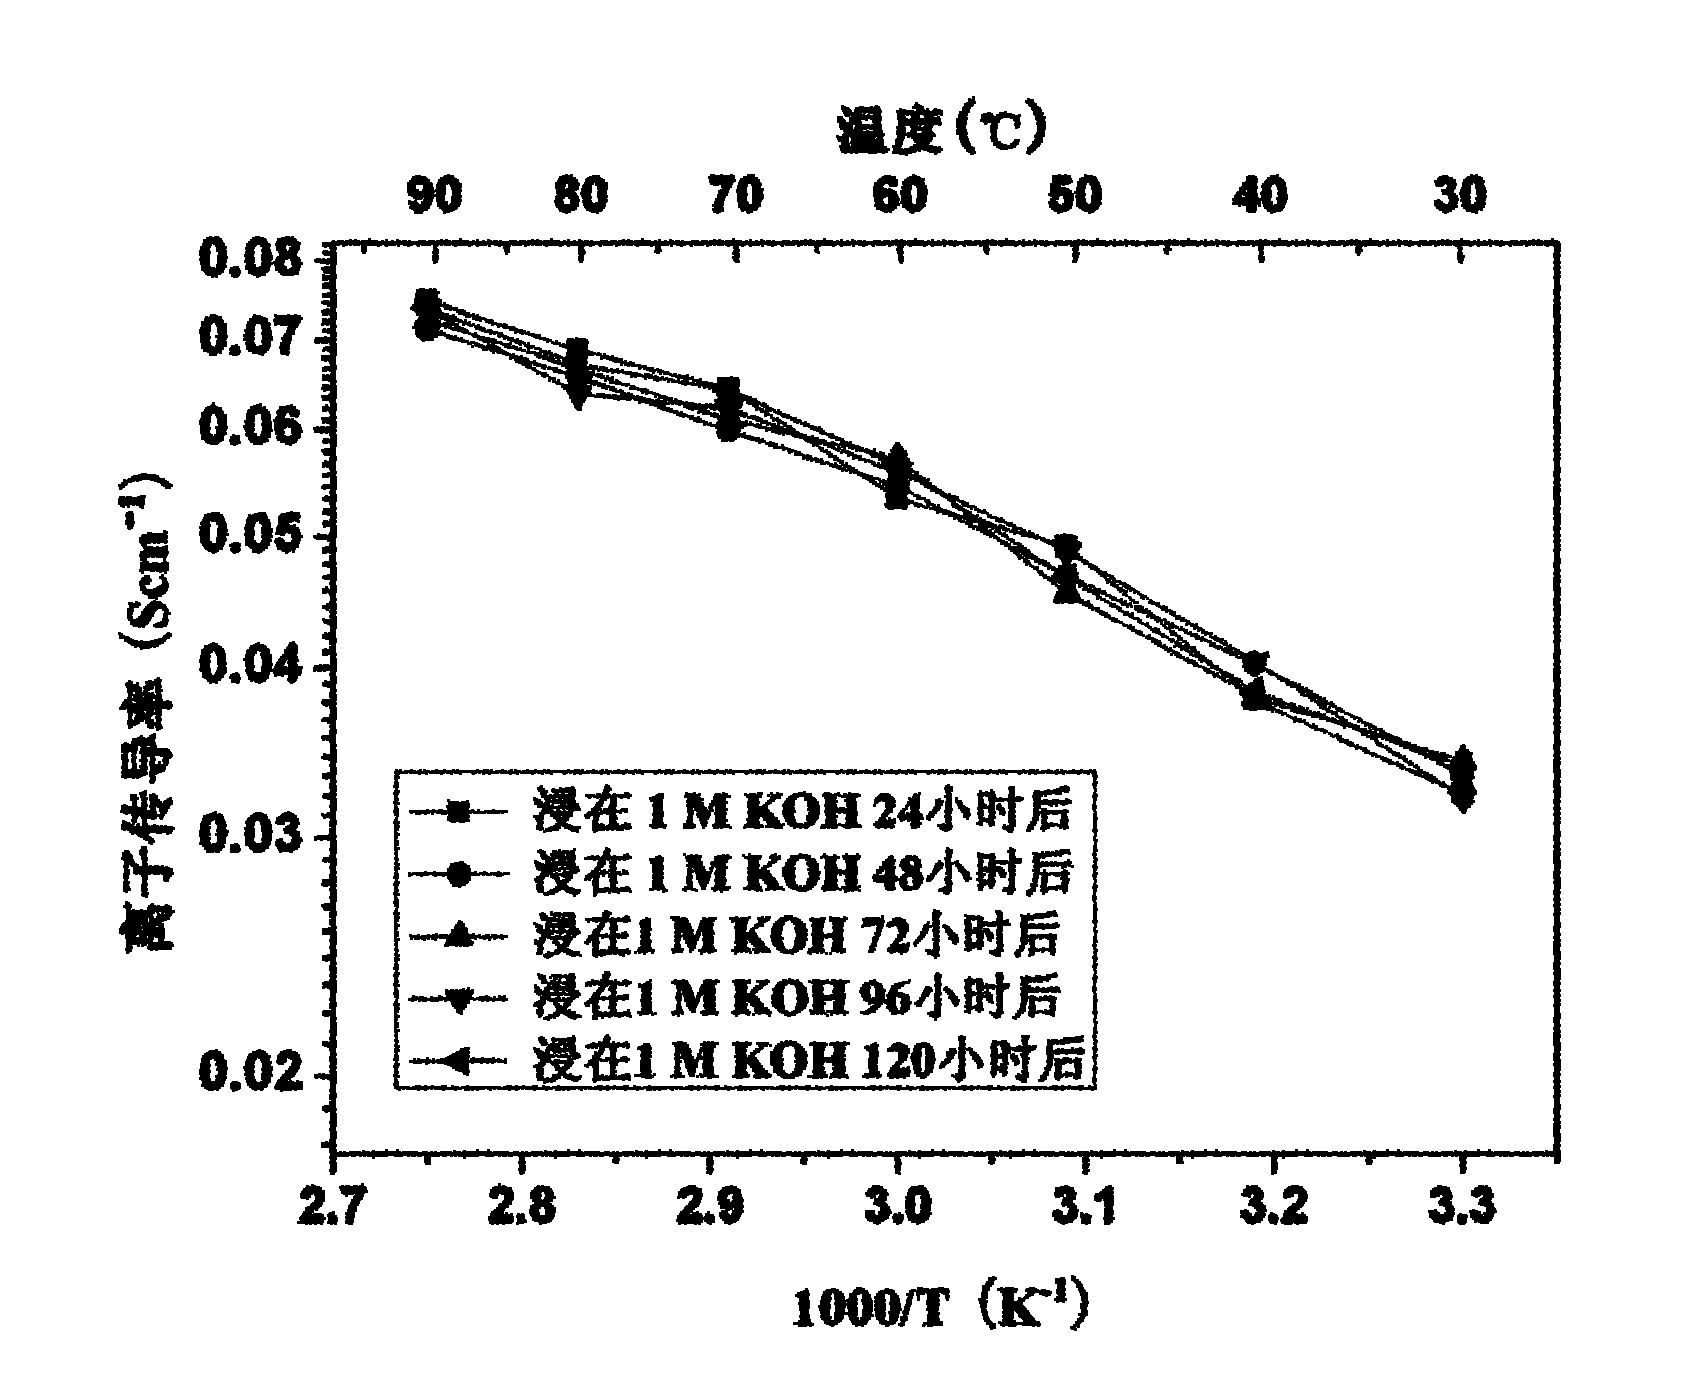 Polymer anion exchange membrane and preparation method thereof